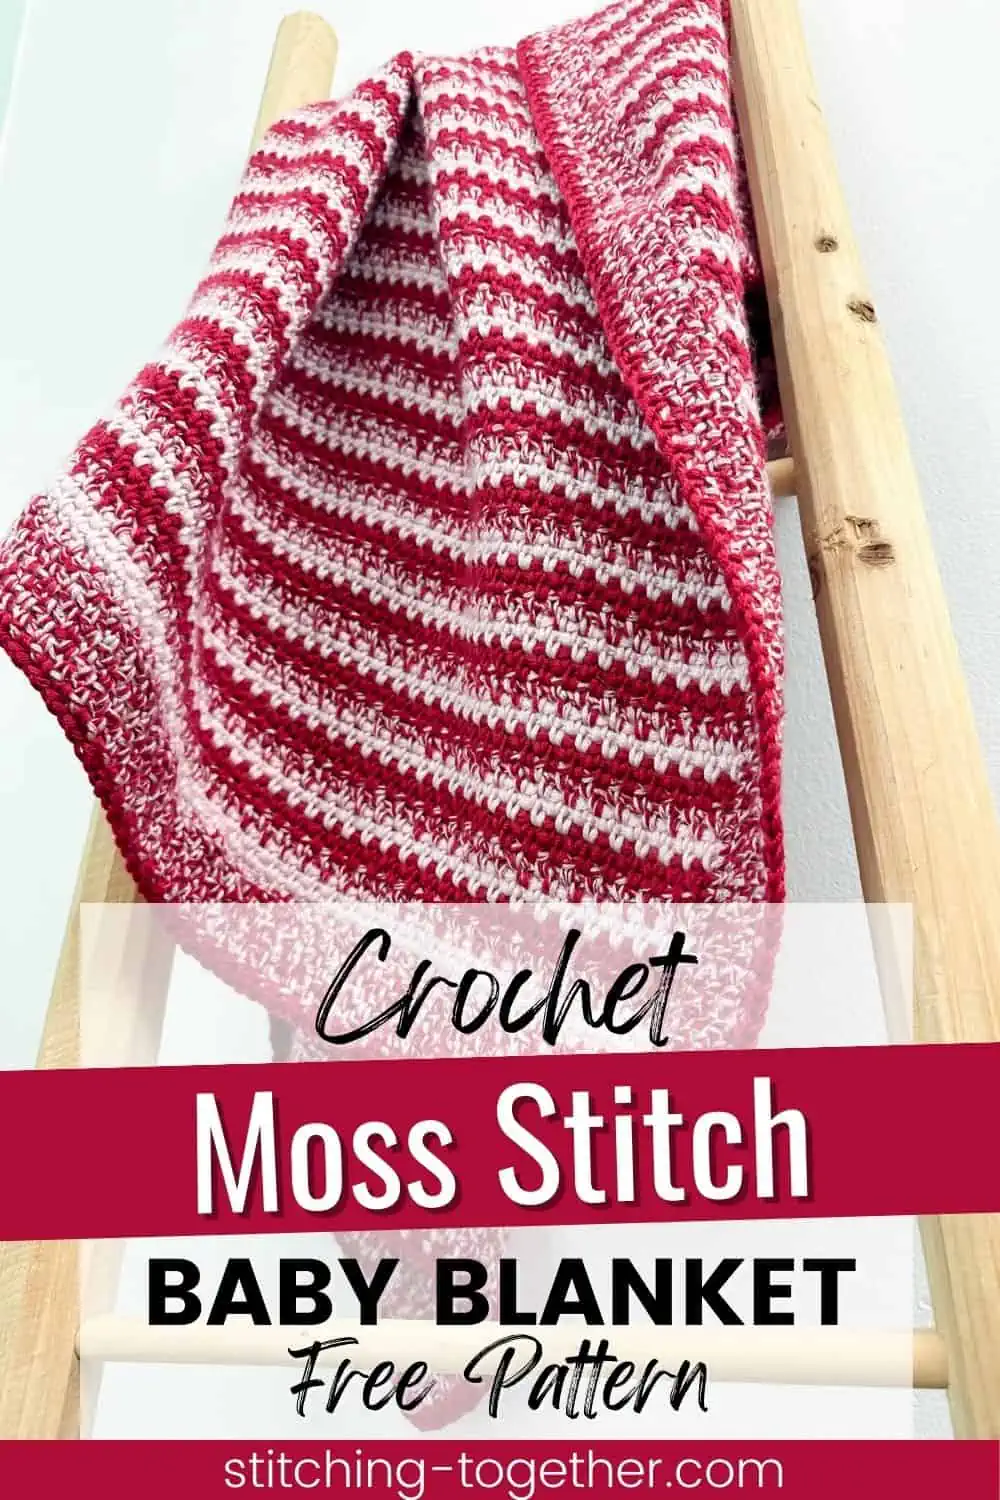 graphic reading "crochet moss stitch baby blanket free pattern" with an image of a striped crochet blanket draped on a blanket ladder